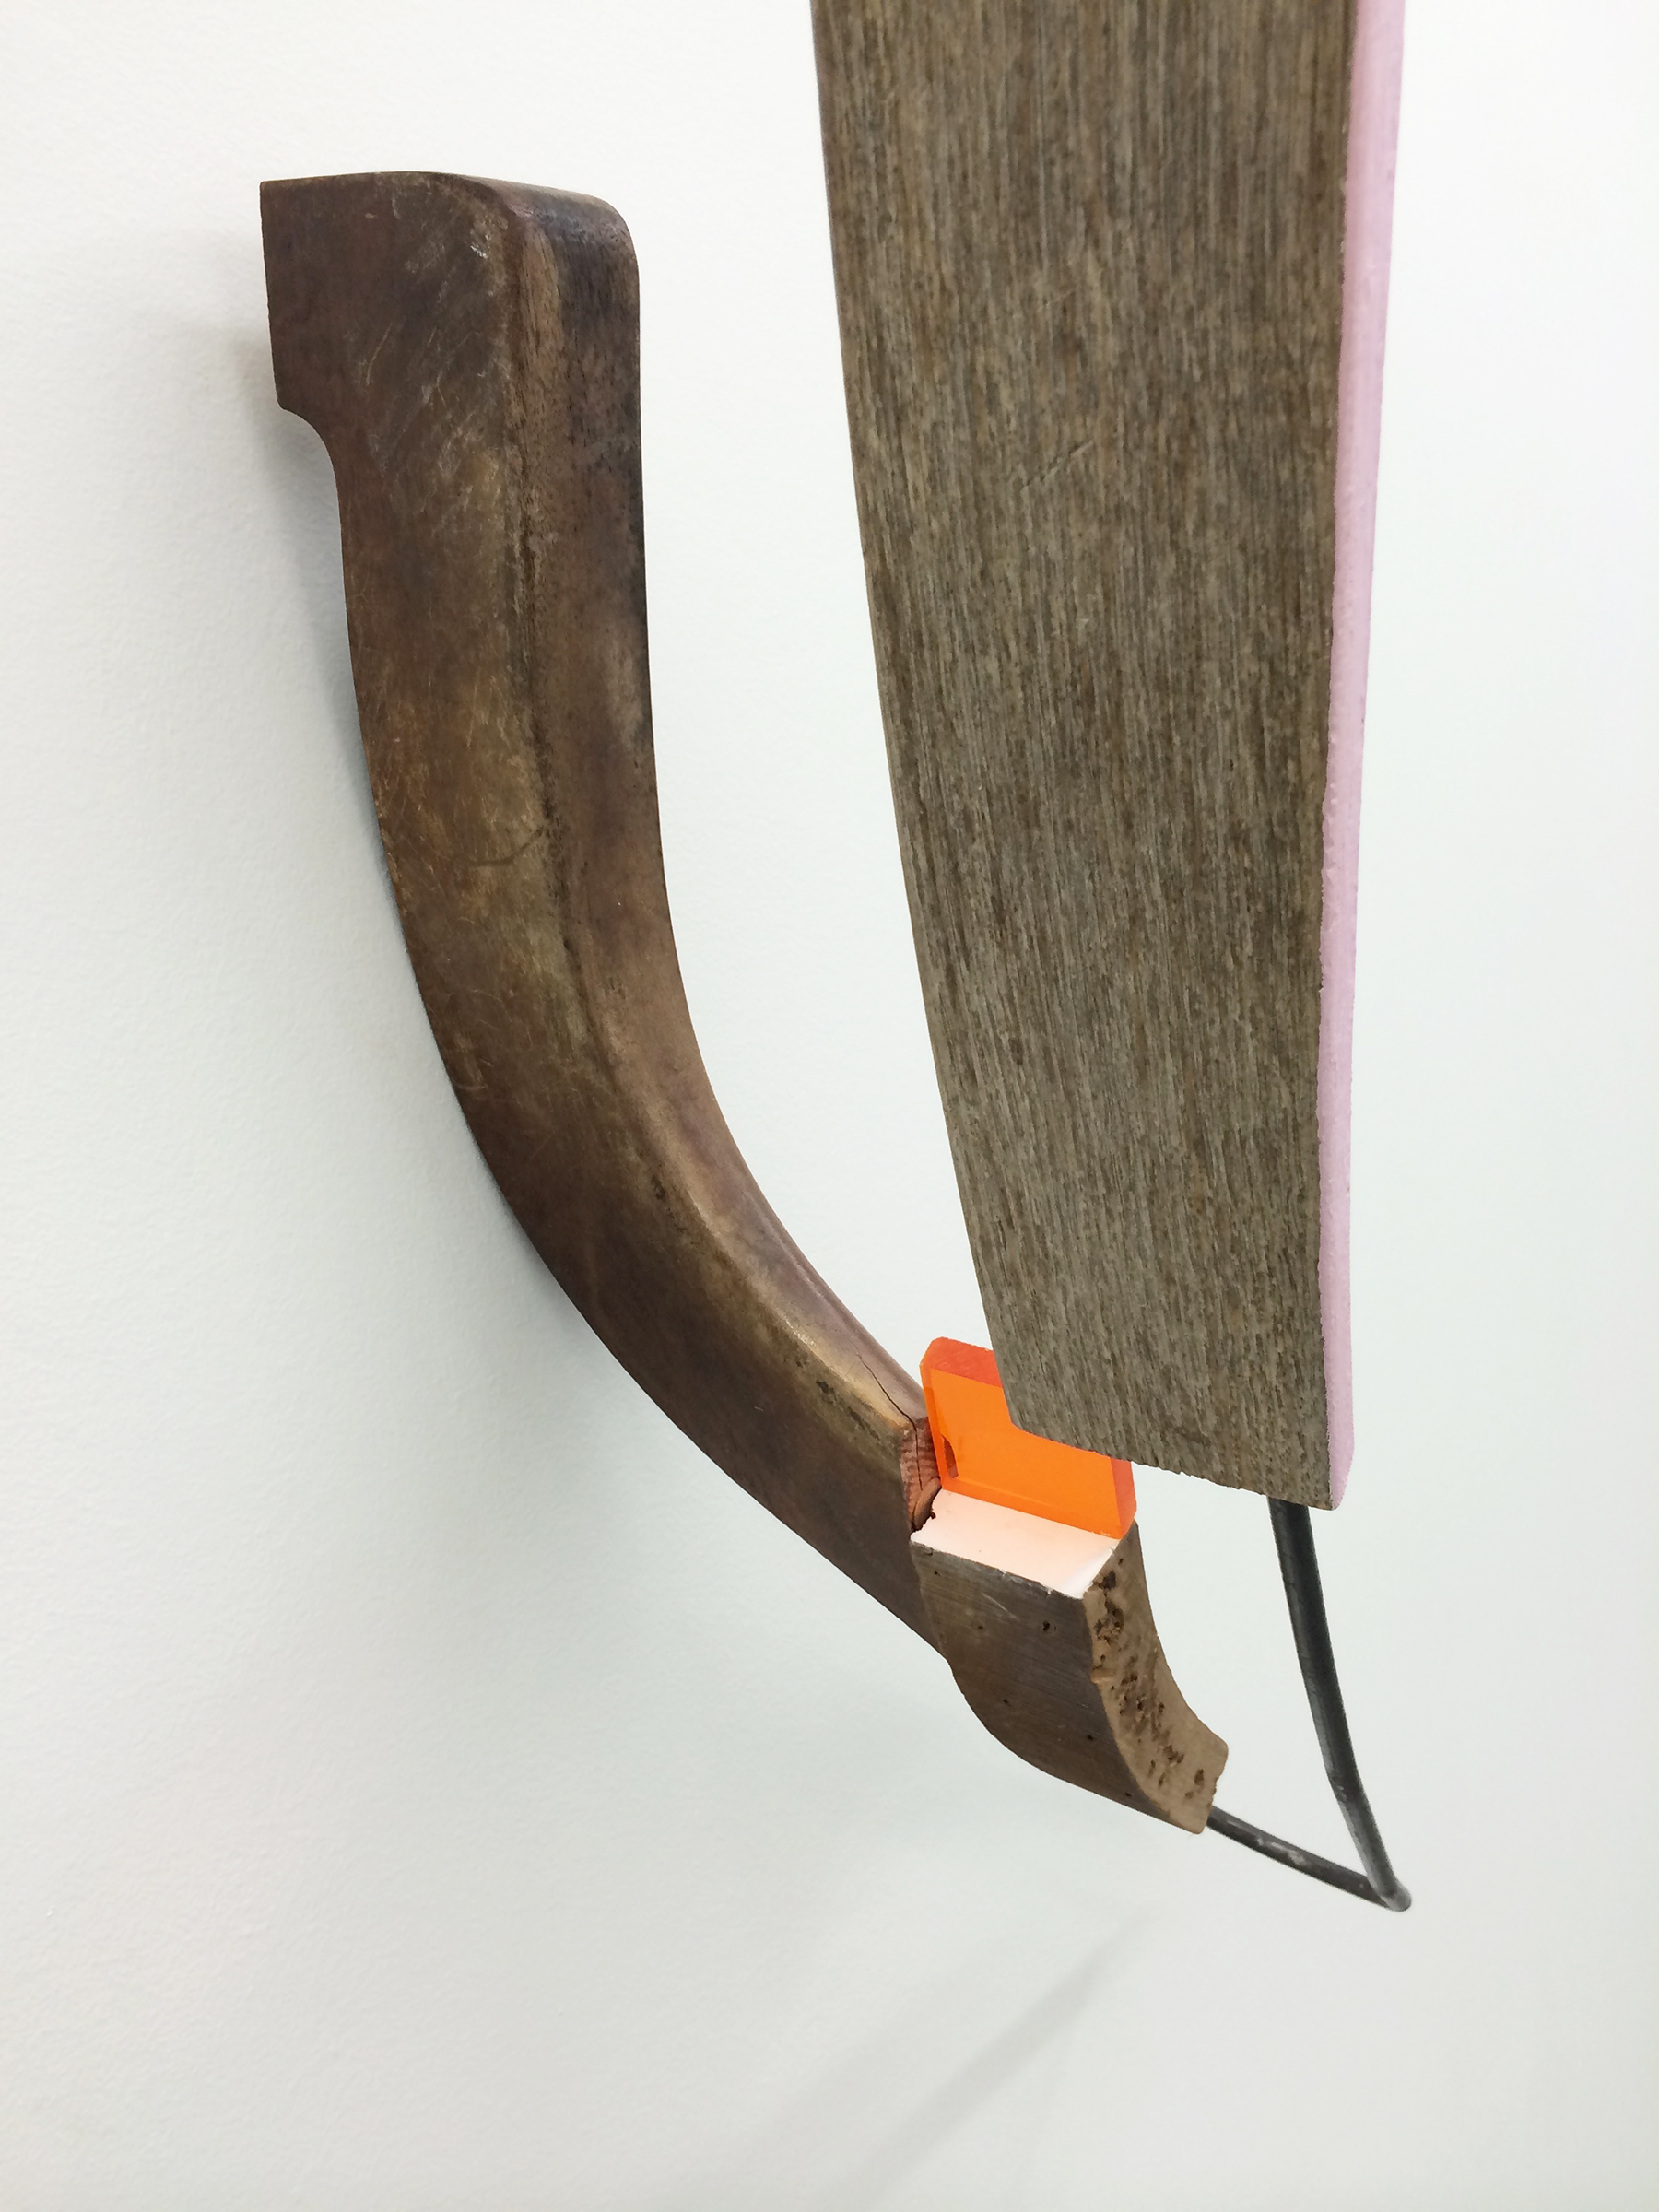   KIRK STOLLER  (detail) &nbsp;Untitled (wish) , wood, steel, plexi glass, acrylic and latex paint, wood stain, 39" x 24" x 15.75" 